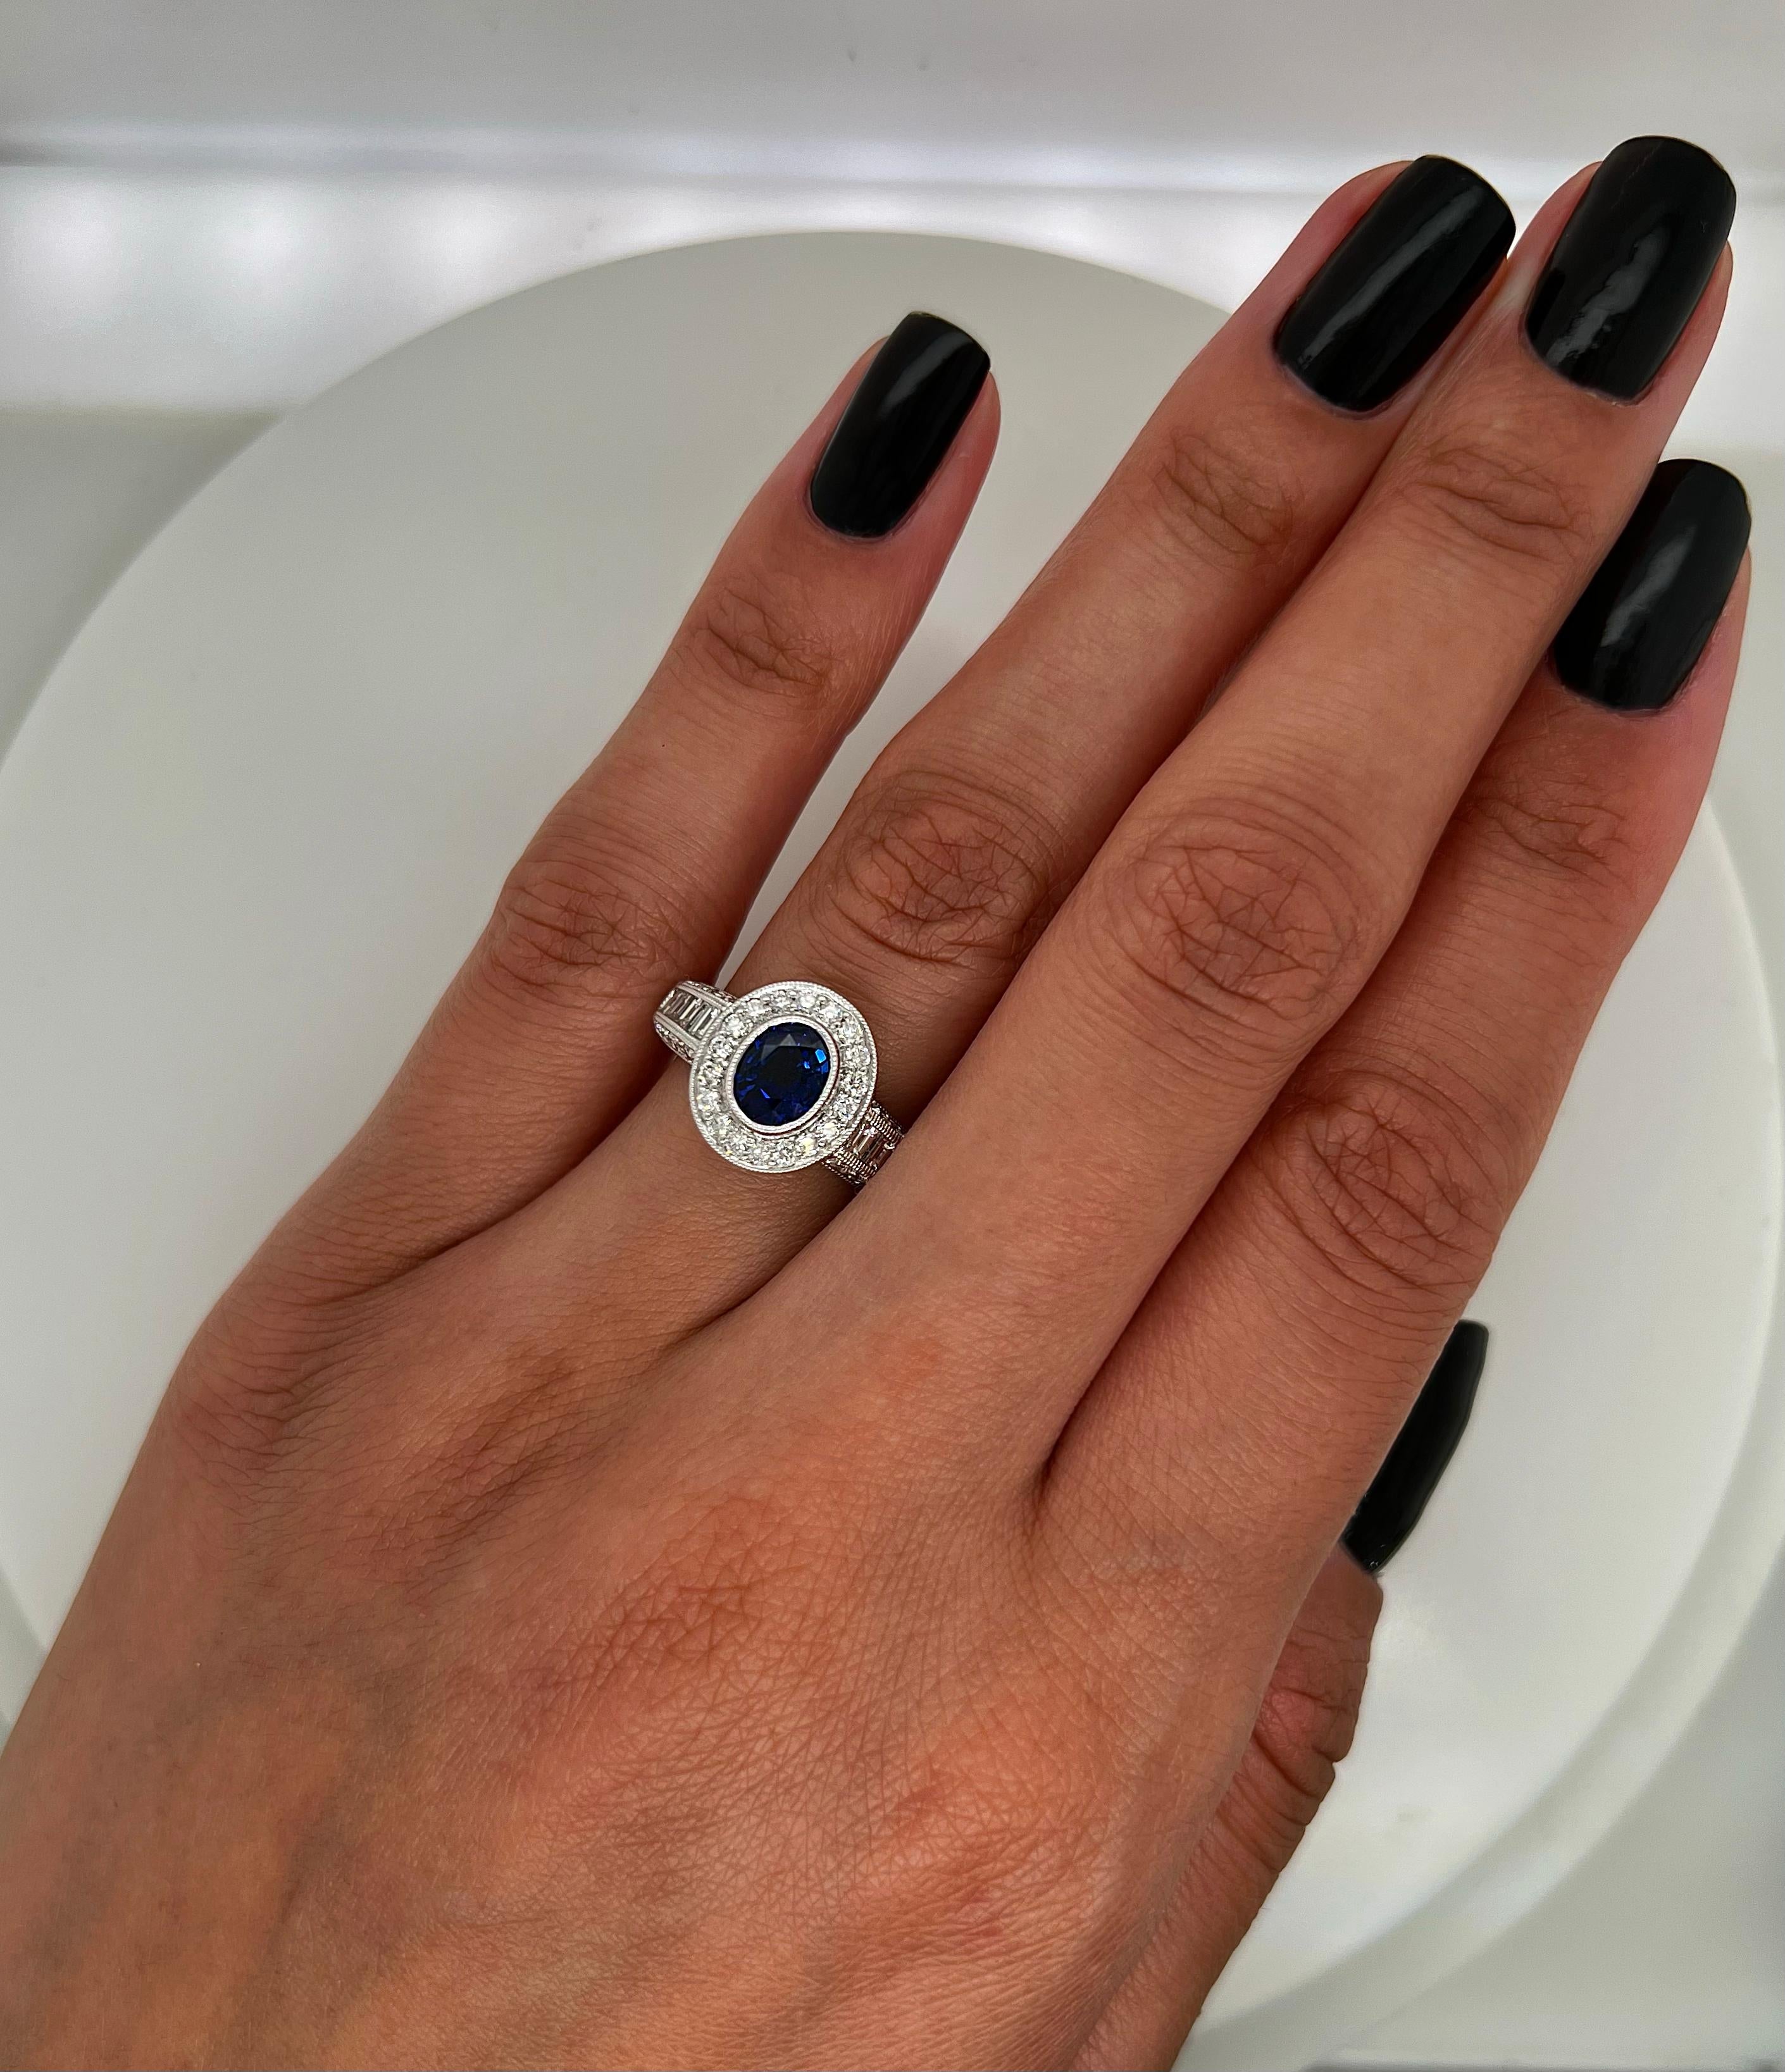 Oval Cut 2.09 Total Carat Sapphire Diamond Engagement Ring For Sale